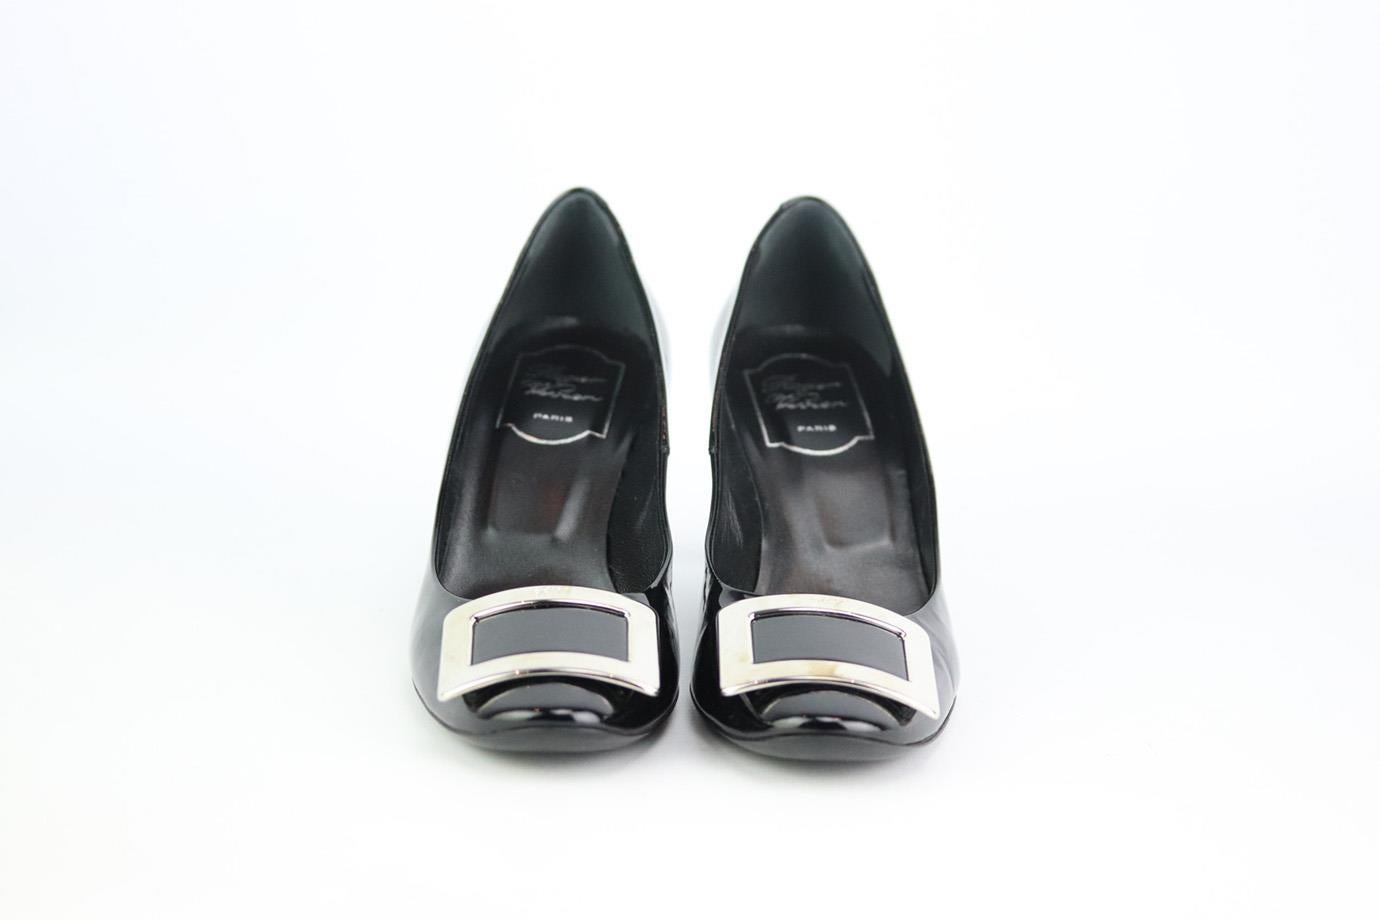 These pumps by Roger Vivier are an elegant re-creation of the founder's original 1965 design, they're made from black patent-leather and embellished with a silver-tone signature buckle that tops the rounded toe. Heel measures approximately 63 mm/